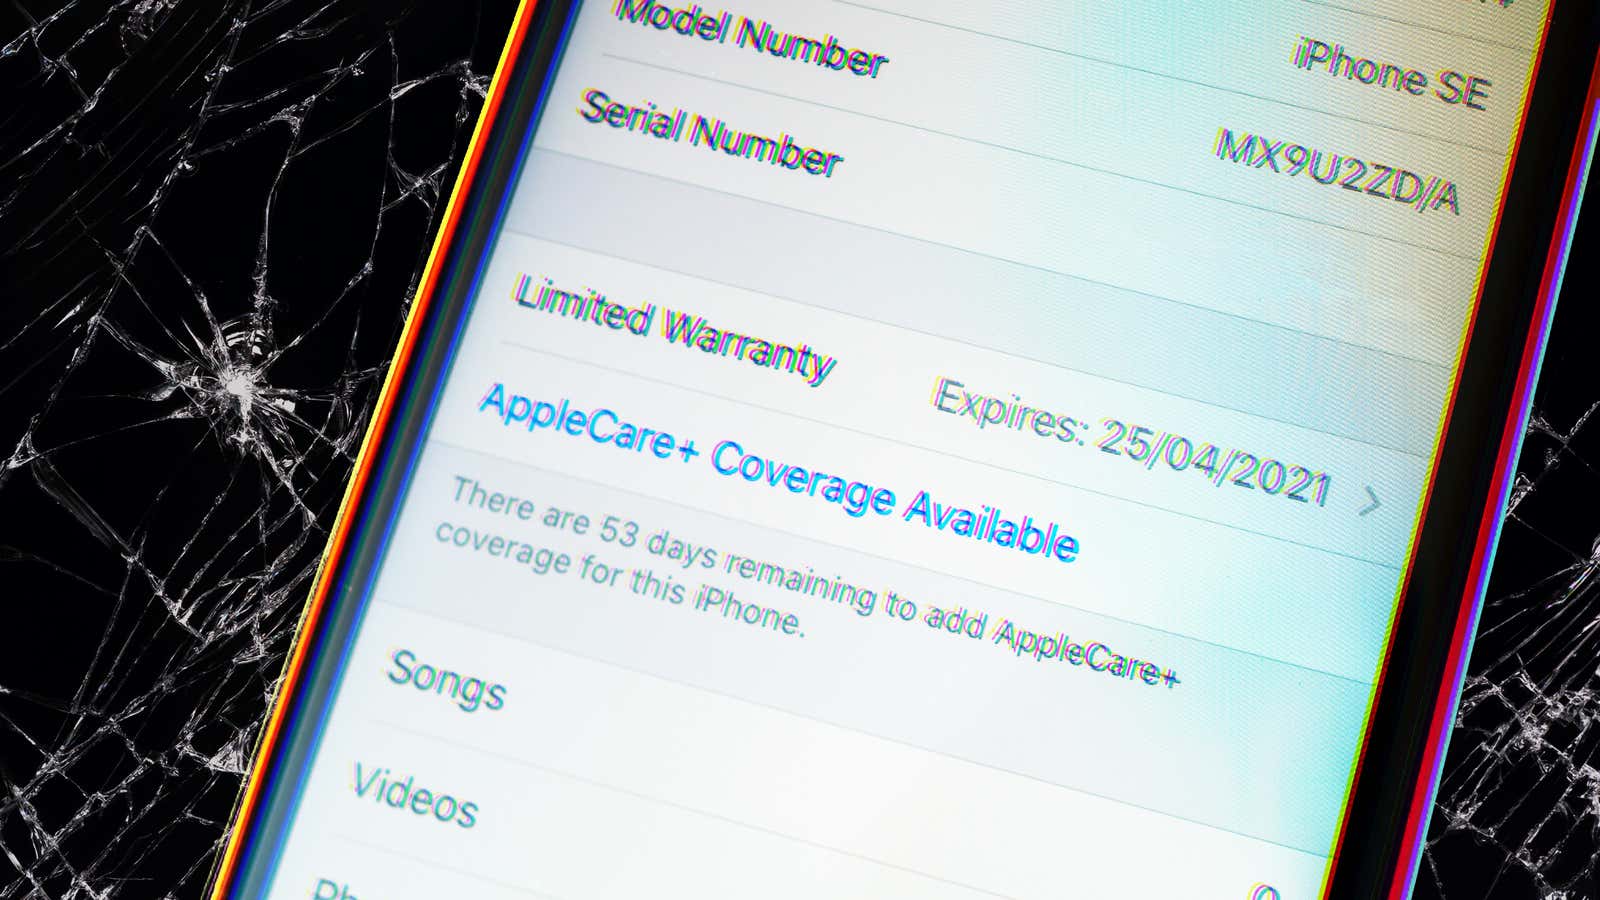 Why You Should Probably Buy AppleCare+ for Your iPhone (Even Though It's Bullshit)